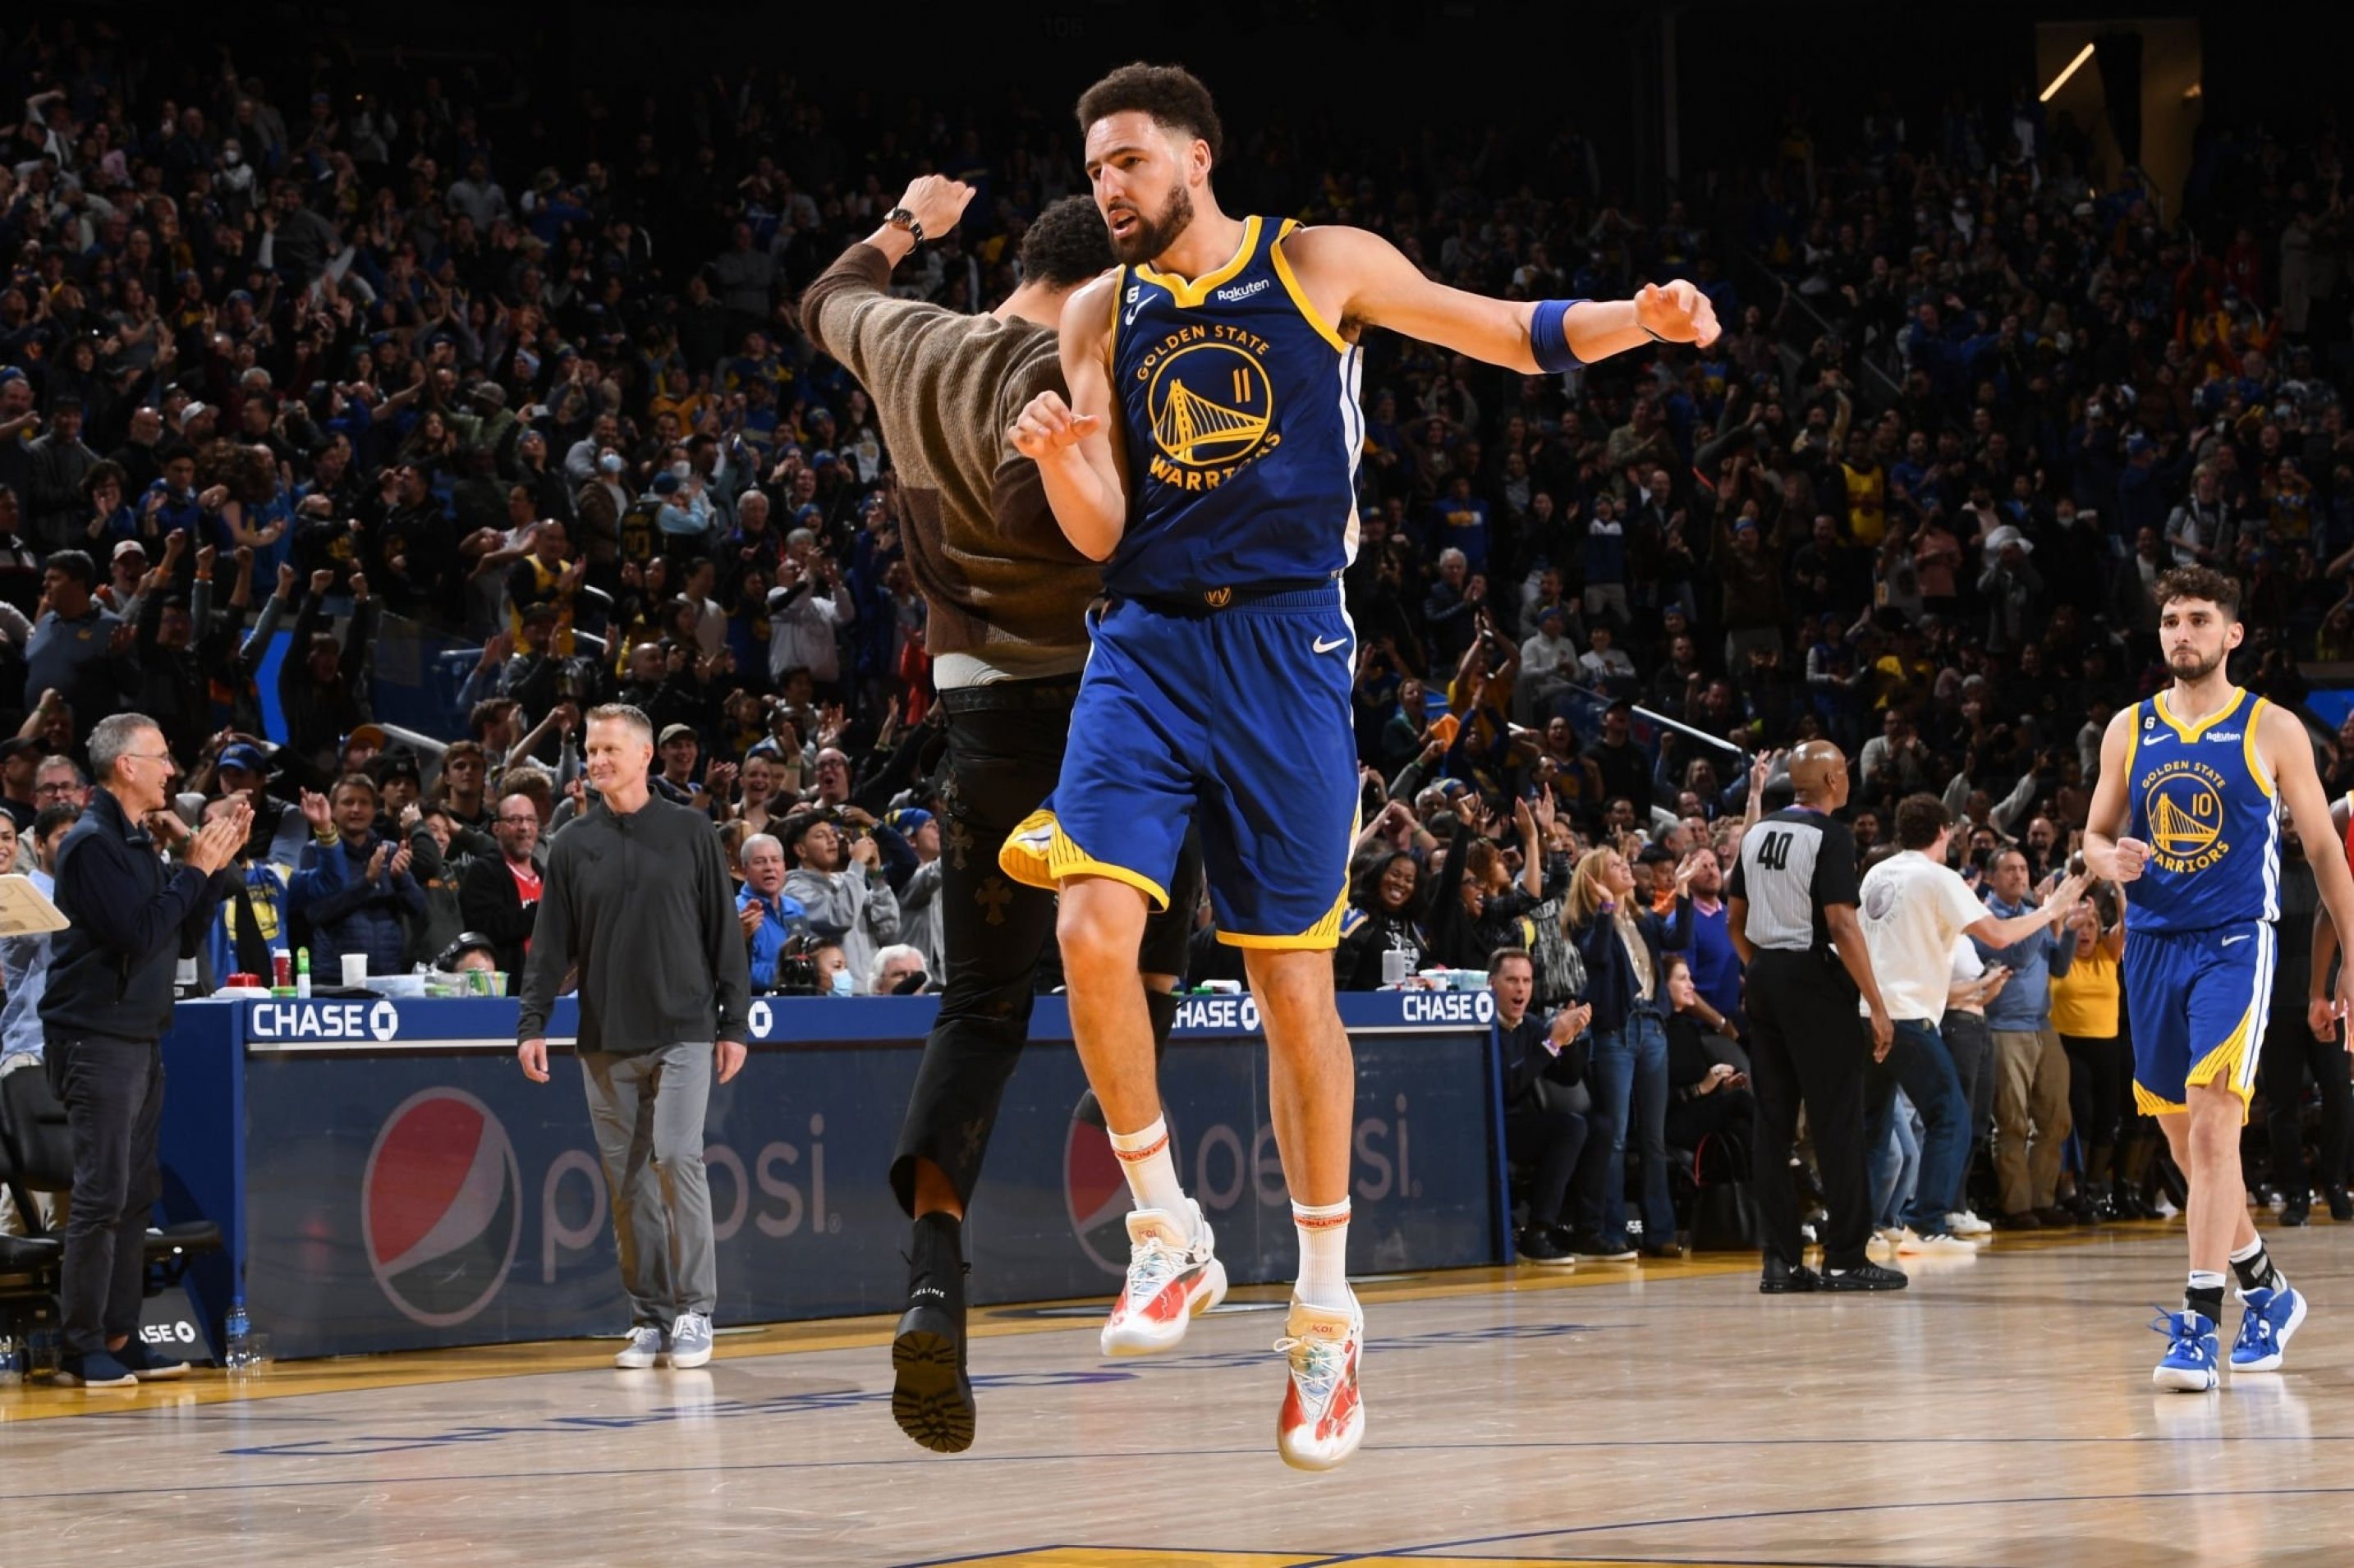 SAN FRANCISCO, CA - JANUARY 2: Klay Thompson #11 of the Golden State Warriors celebrates during the game against the Atlanta Hawks on January 2, 2023 at Chase Center in San Francisco, California.